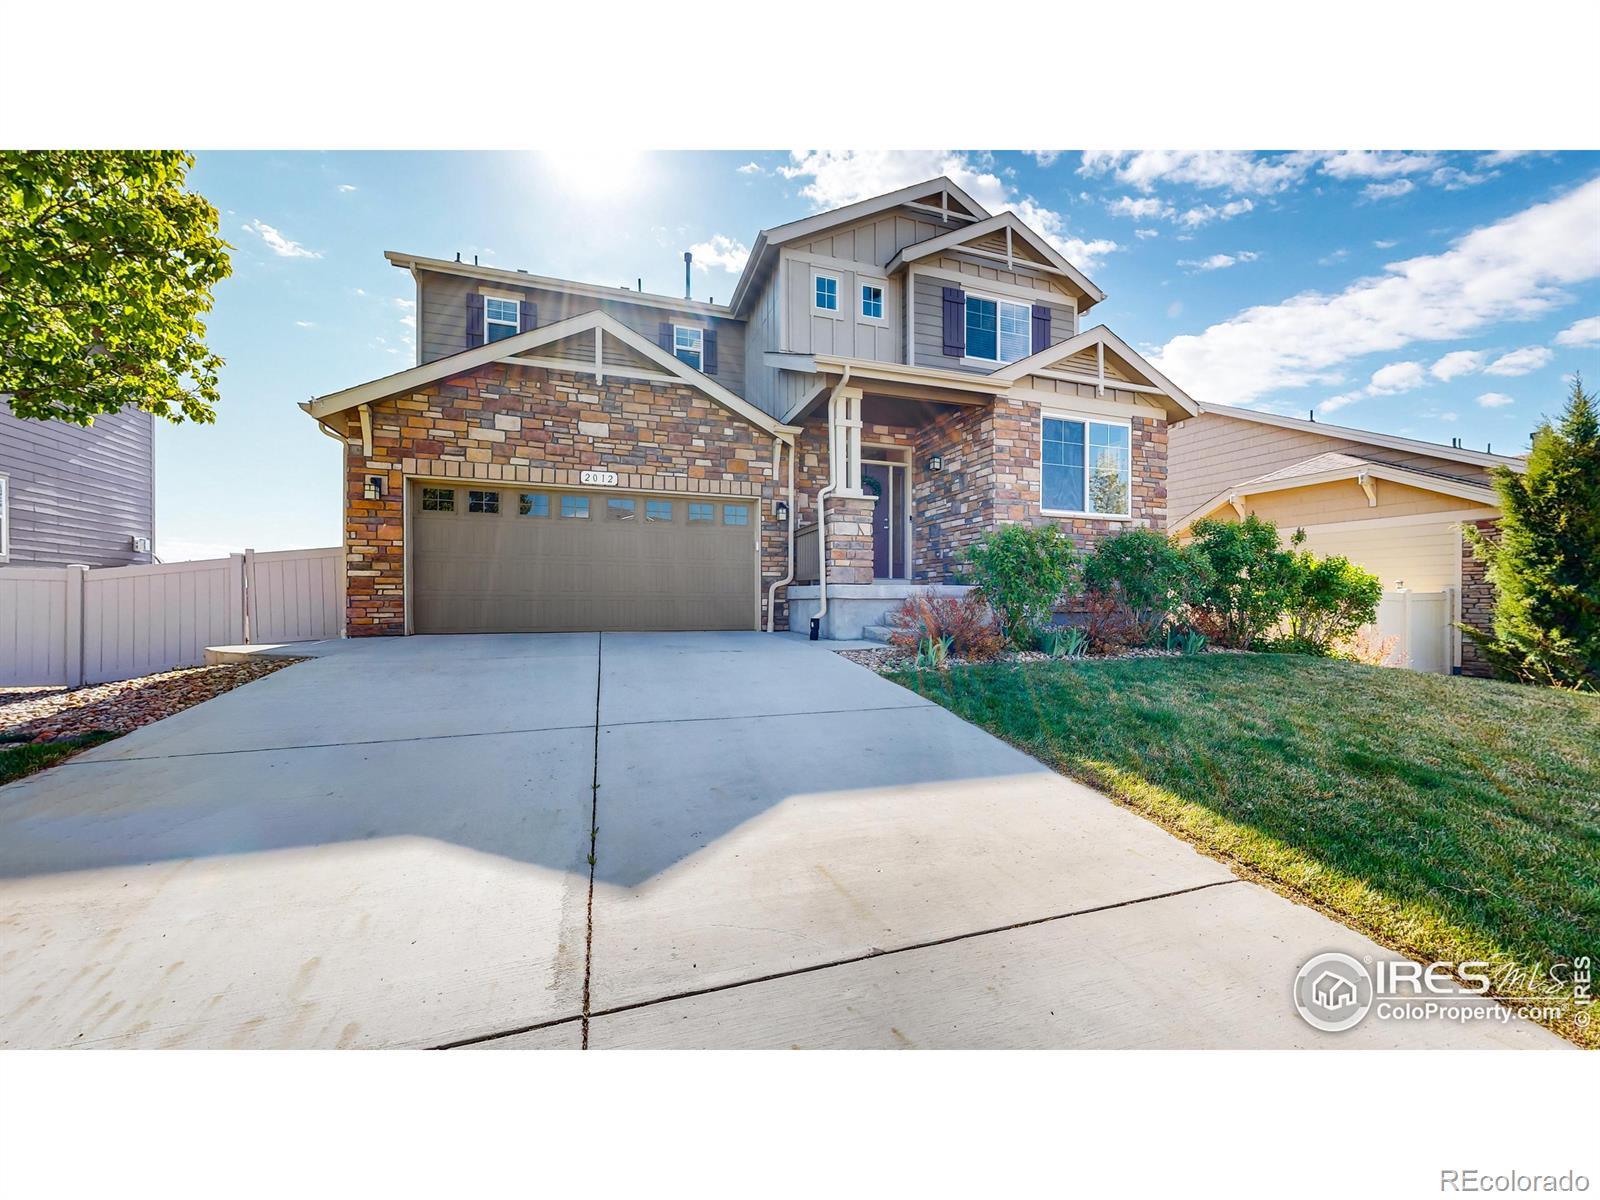 CMA Image for 2012  80th ave ct,Greeley, Colorado